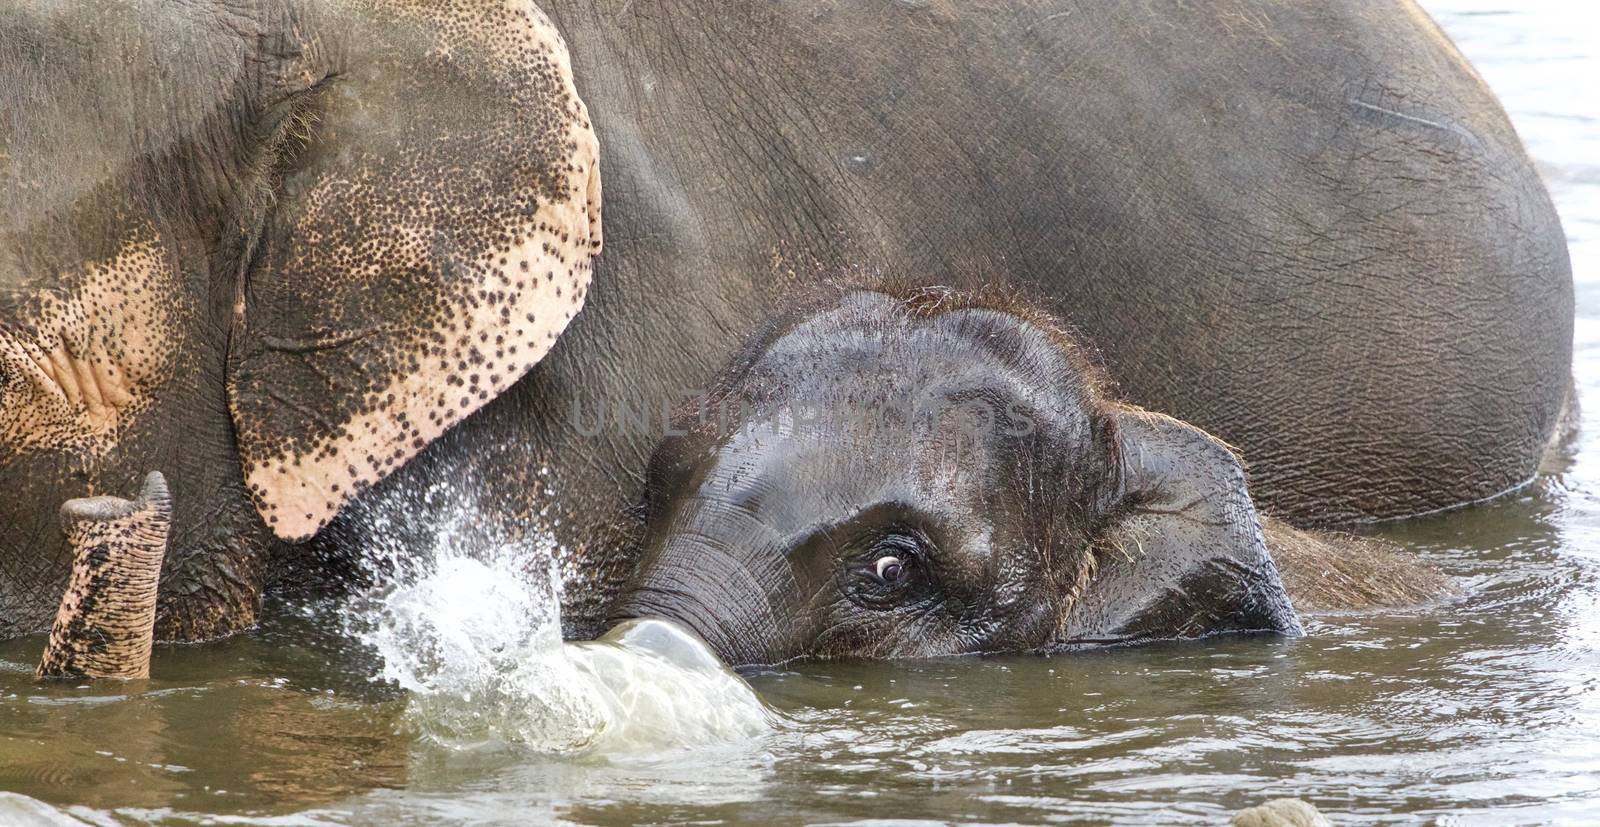 Isolated photo of a funny young elephant swimming